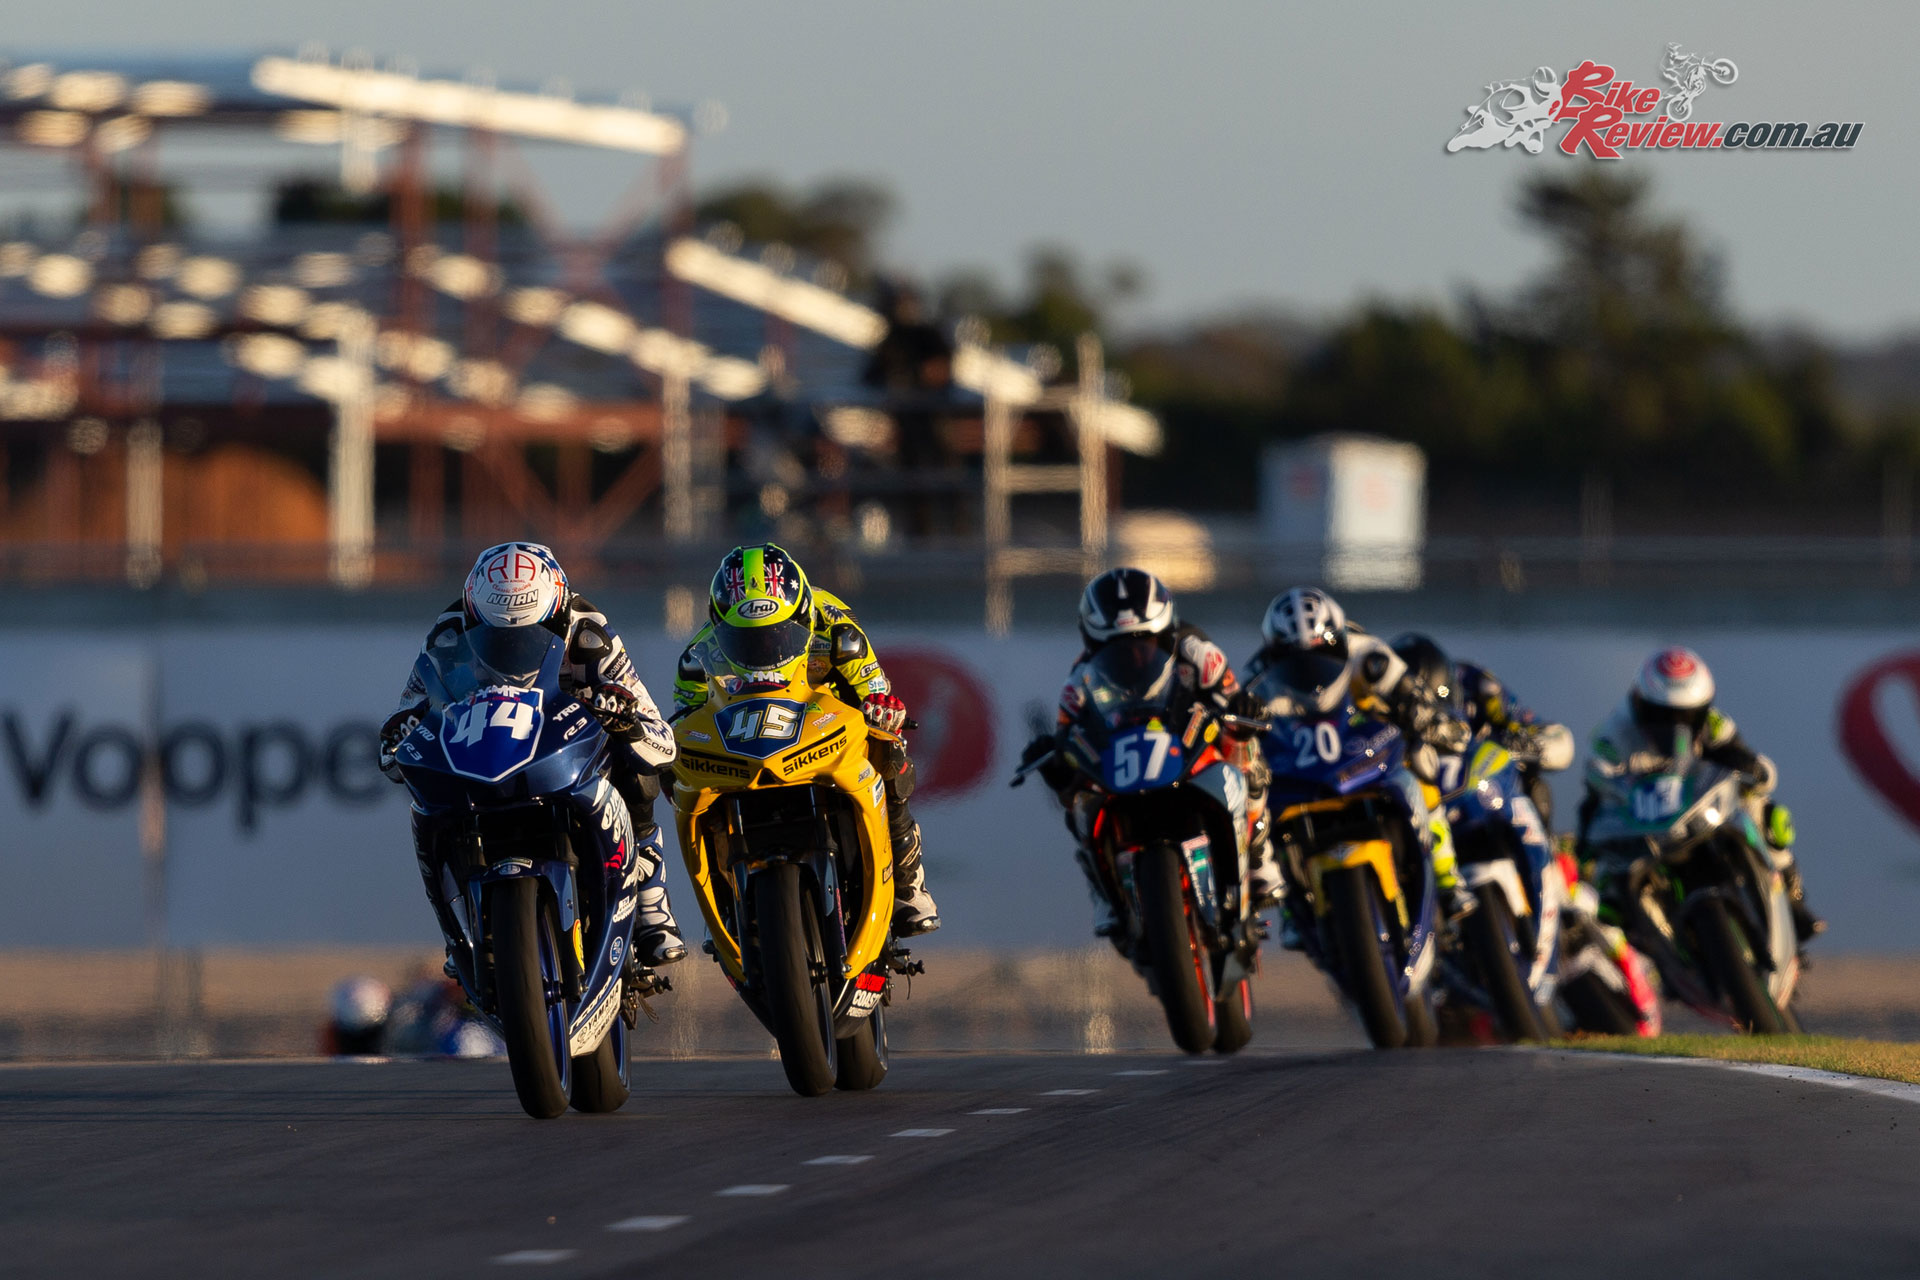 ASBK returns in 2019 with the calendar just announced